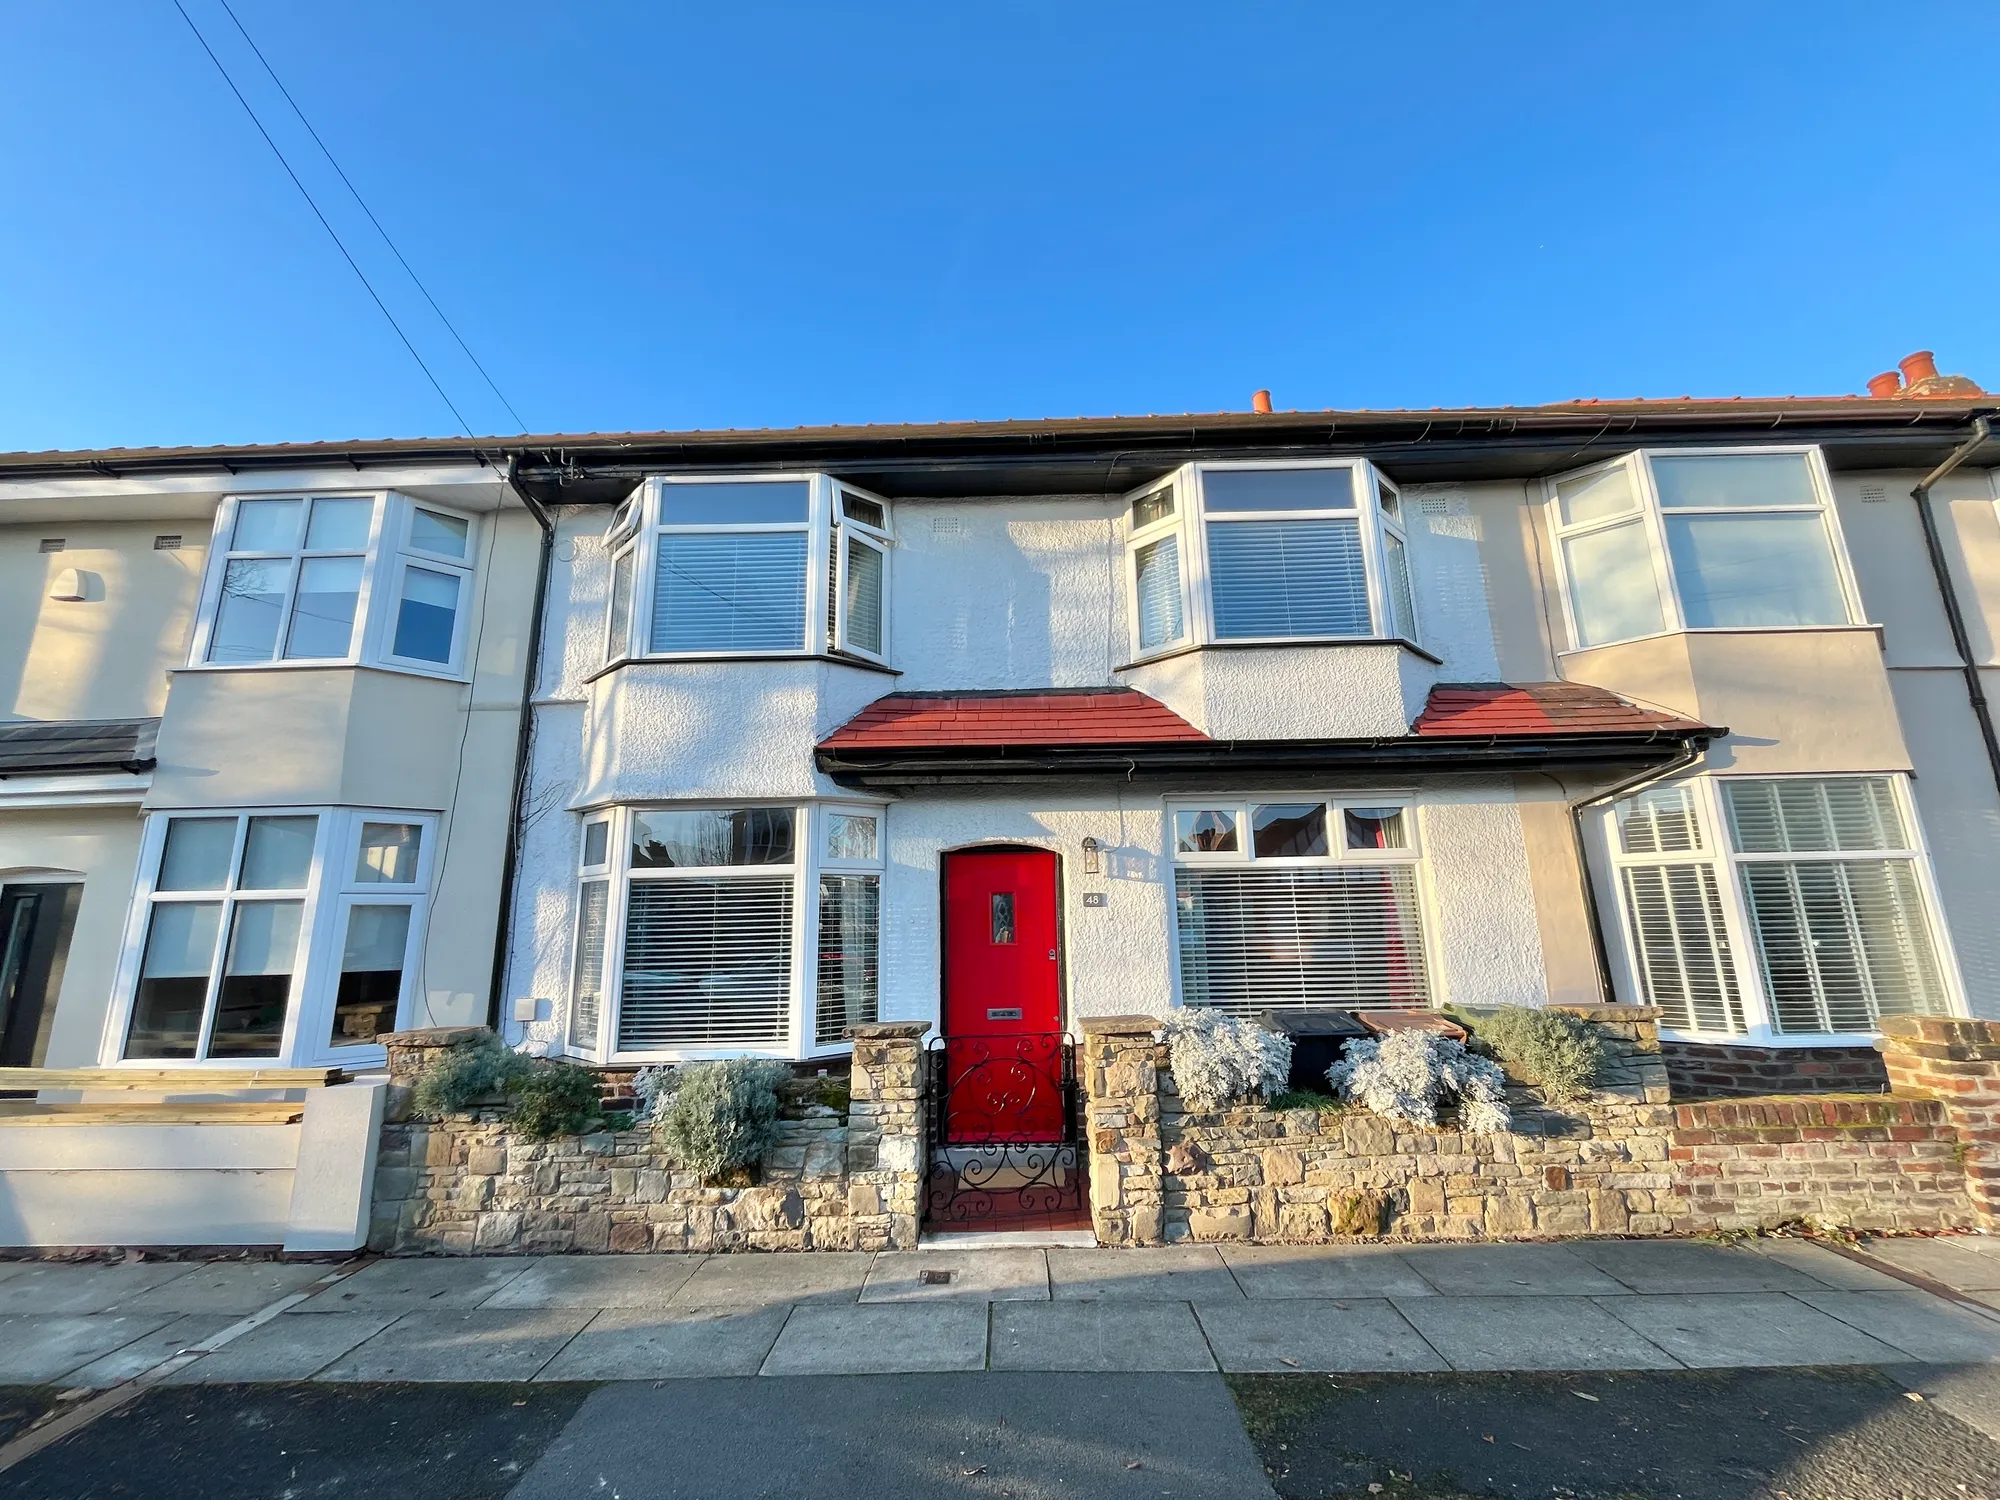 WHAT A GORGEOUS HOUSE! Welcome to this exquisite three-bedroom double-fronted terrace house, a true showcase of style and elegance! Conveniently located just off College Road in Crosby, this residence offers easy access to a variety of restaurants, shops, train station, and beach